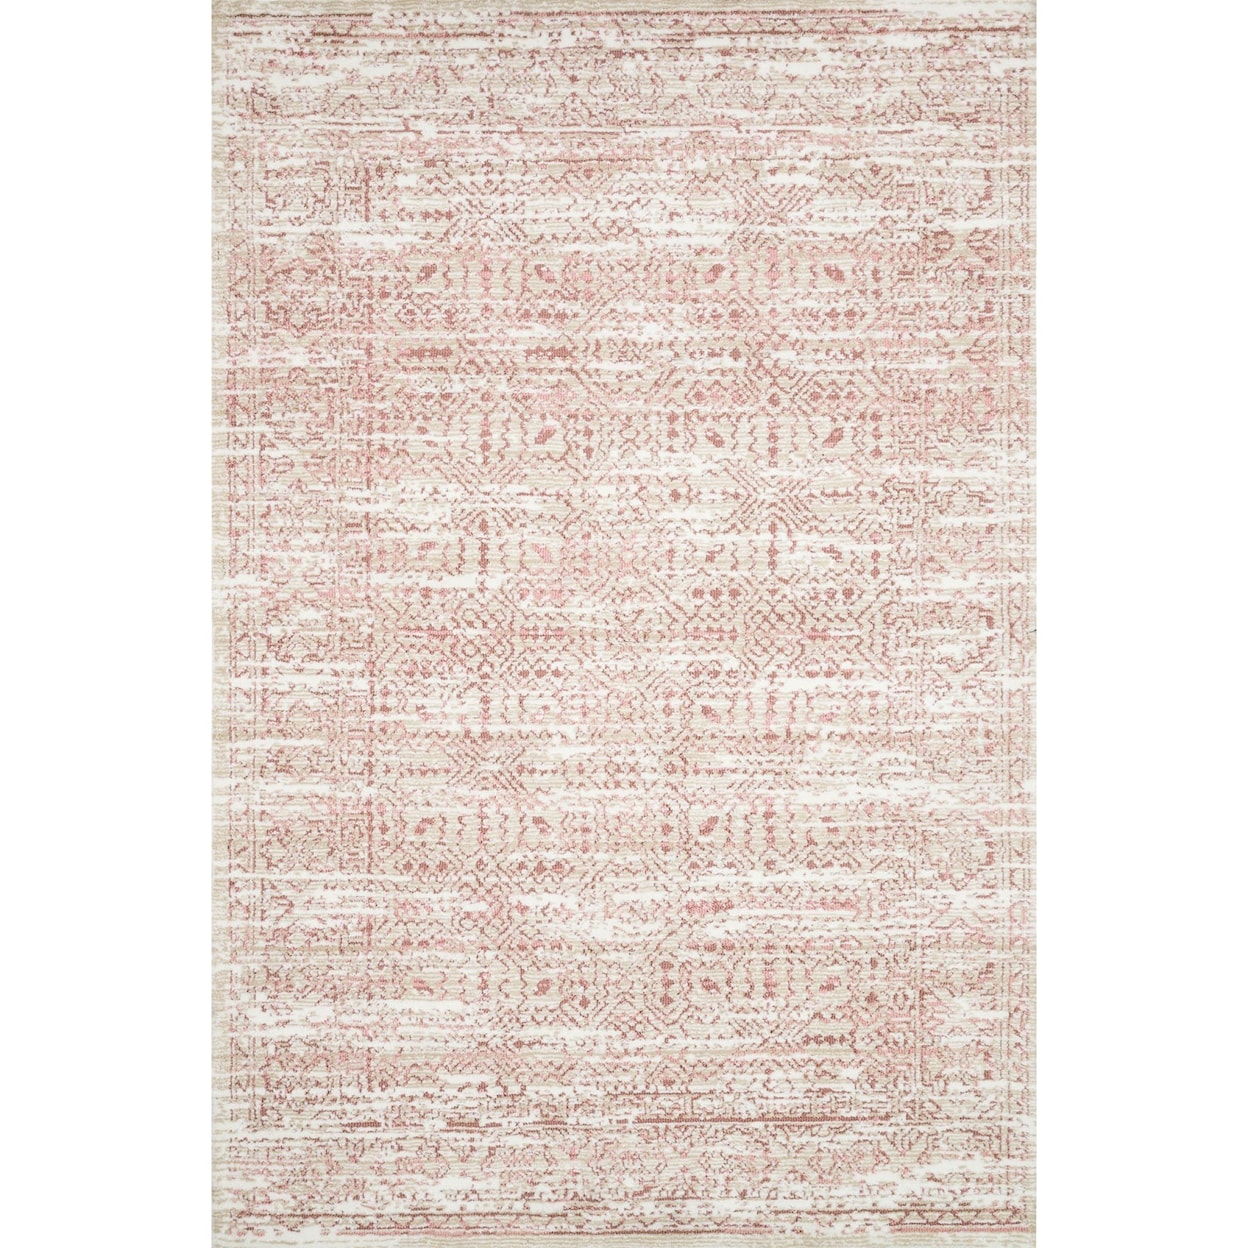 Magnolia Home by Joanna Gaines for Loloi Lotus 5'-0" x 7'-6" Rug